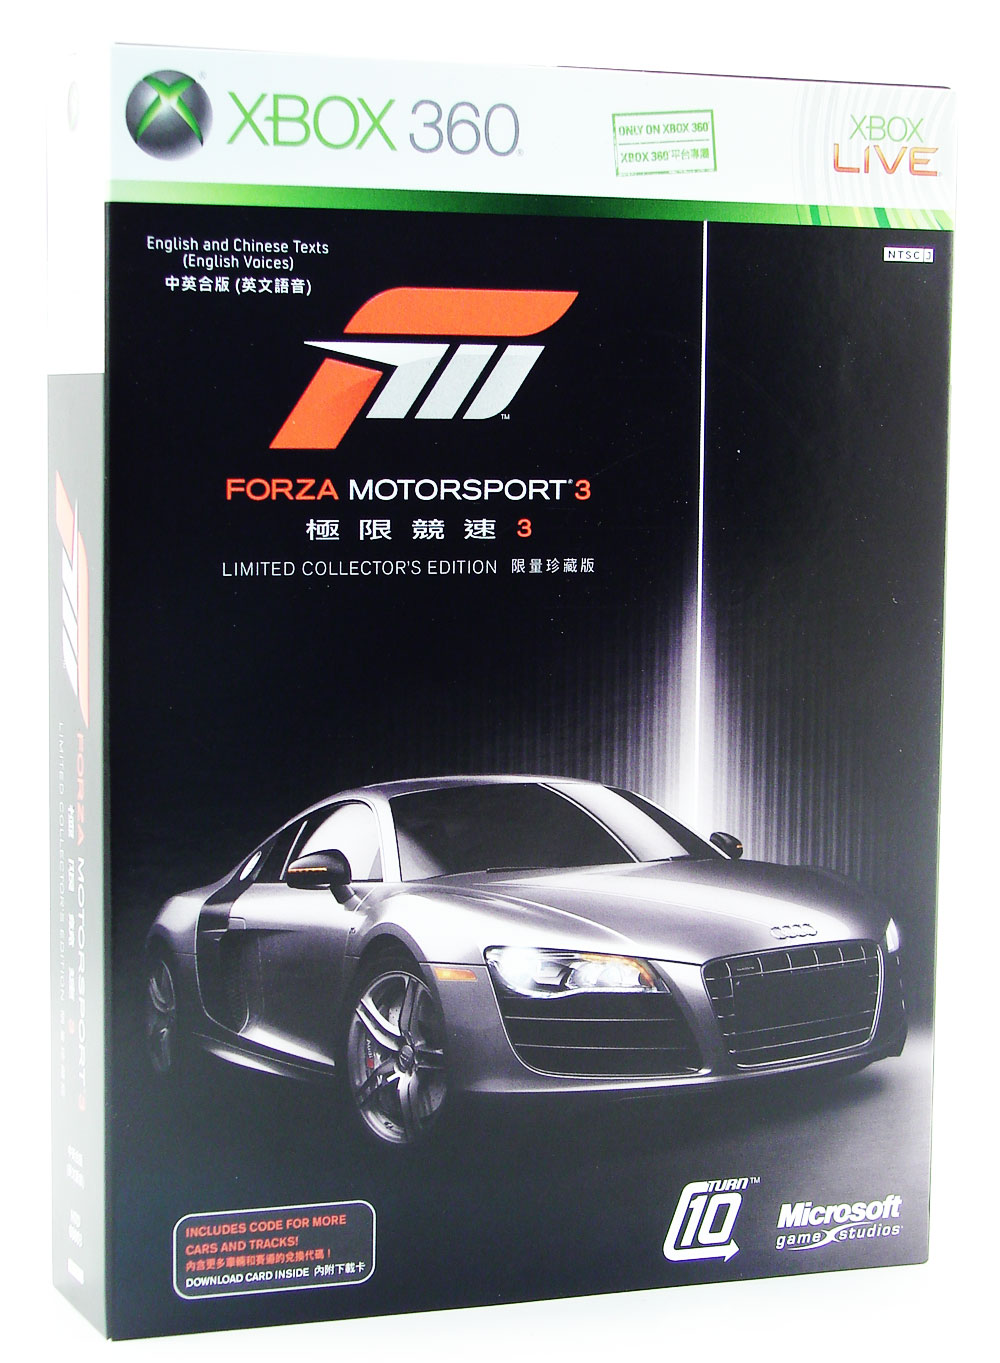 XBOX 360 Forza Motorsport 4 Limited Collector's Edition - NTSC